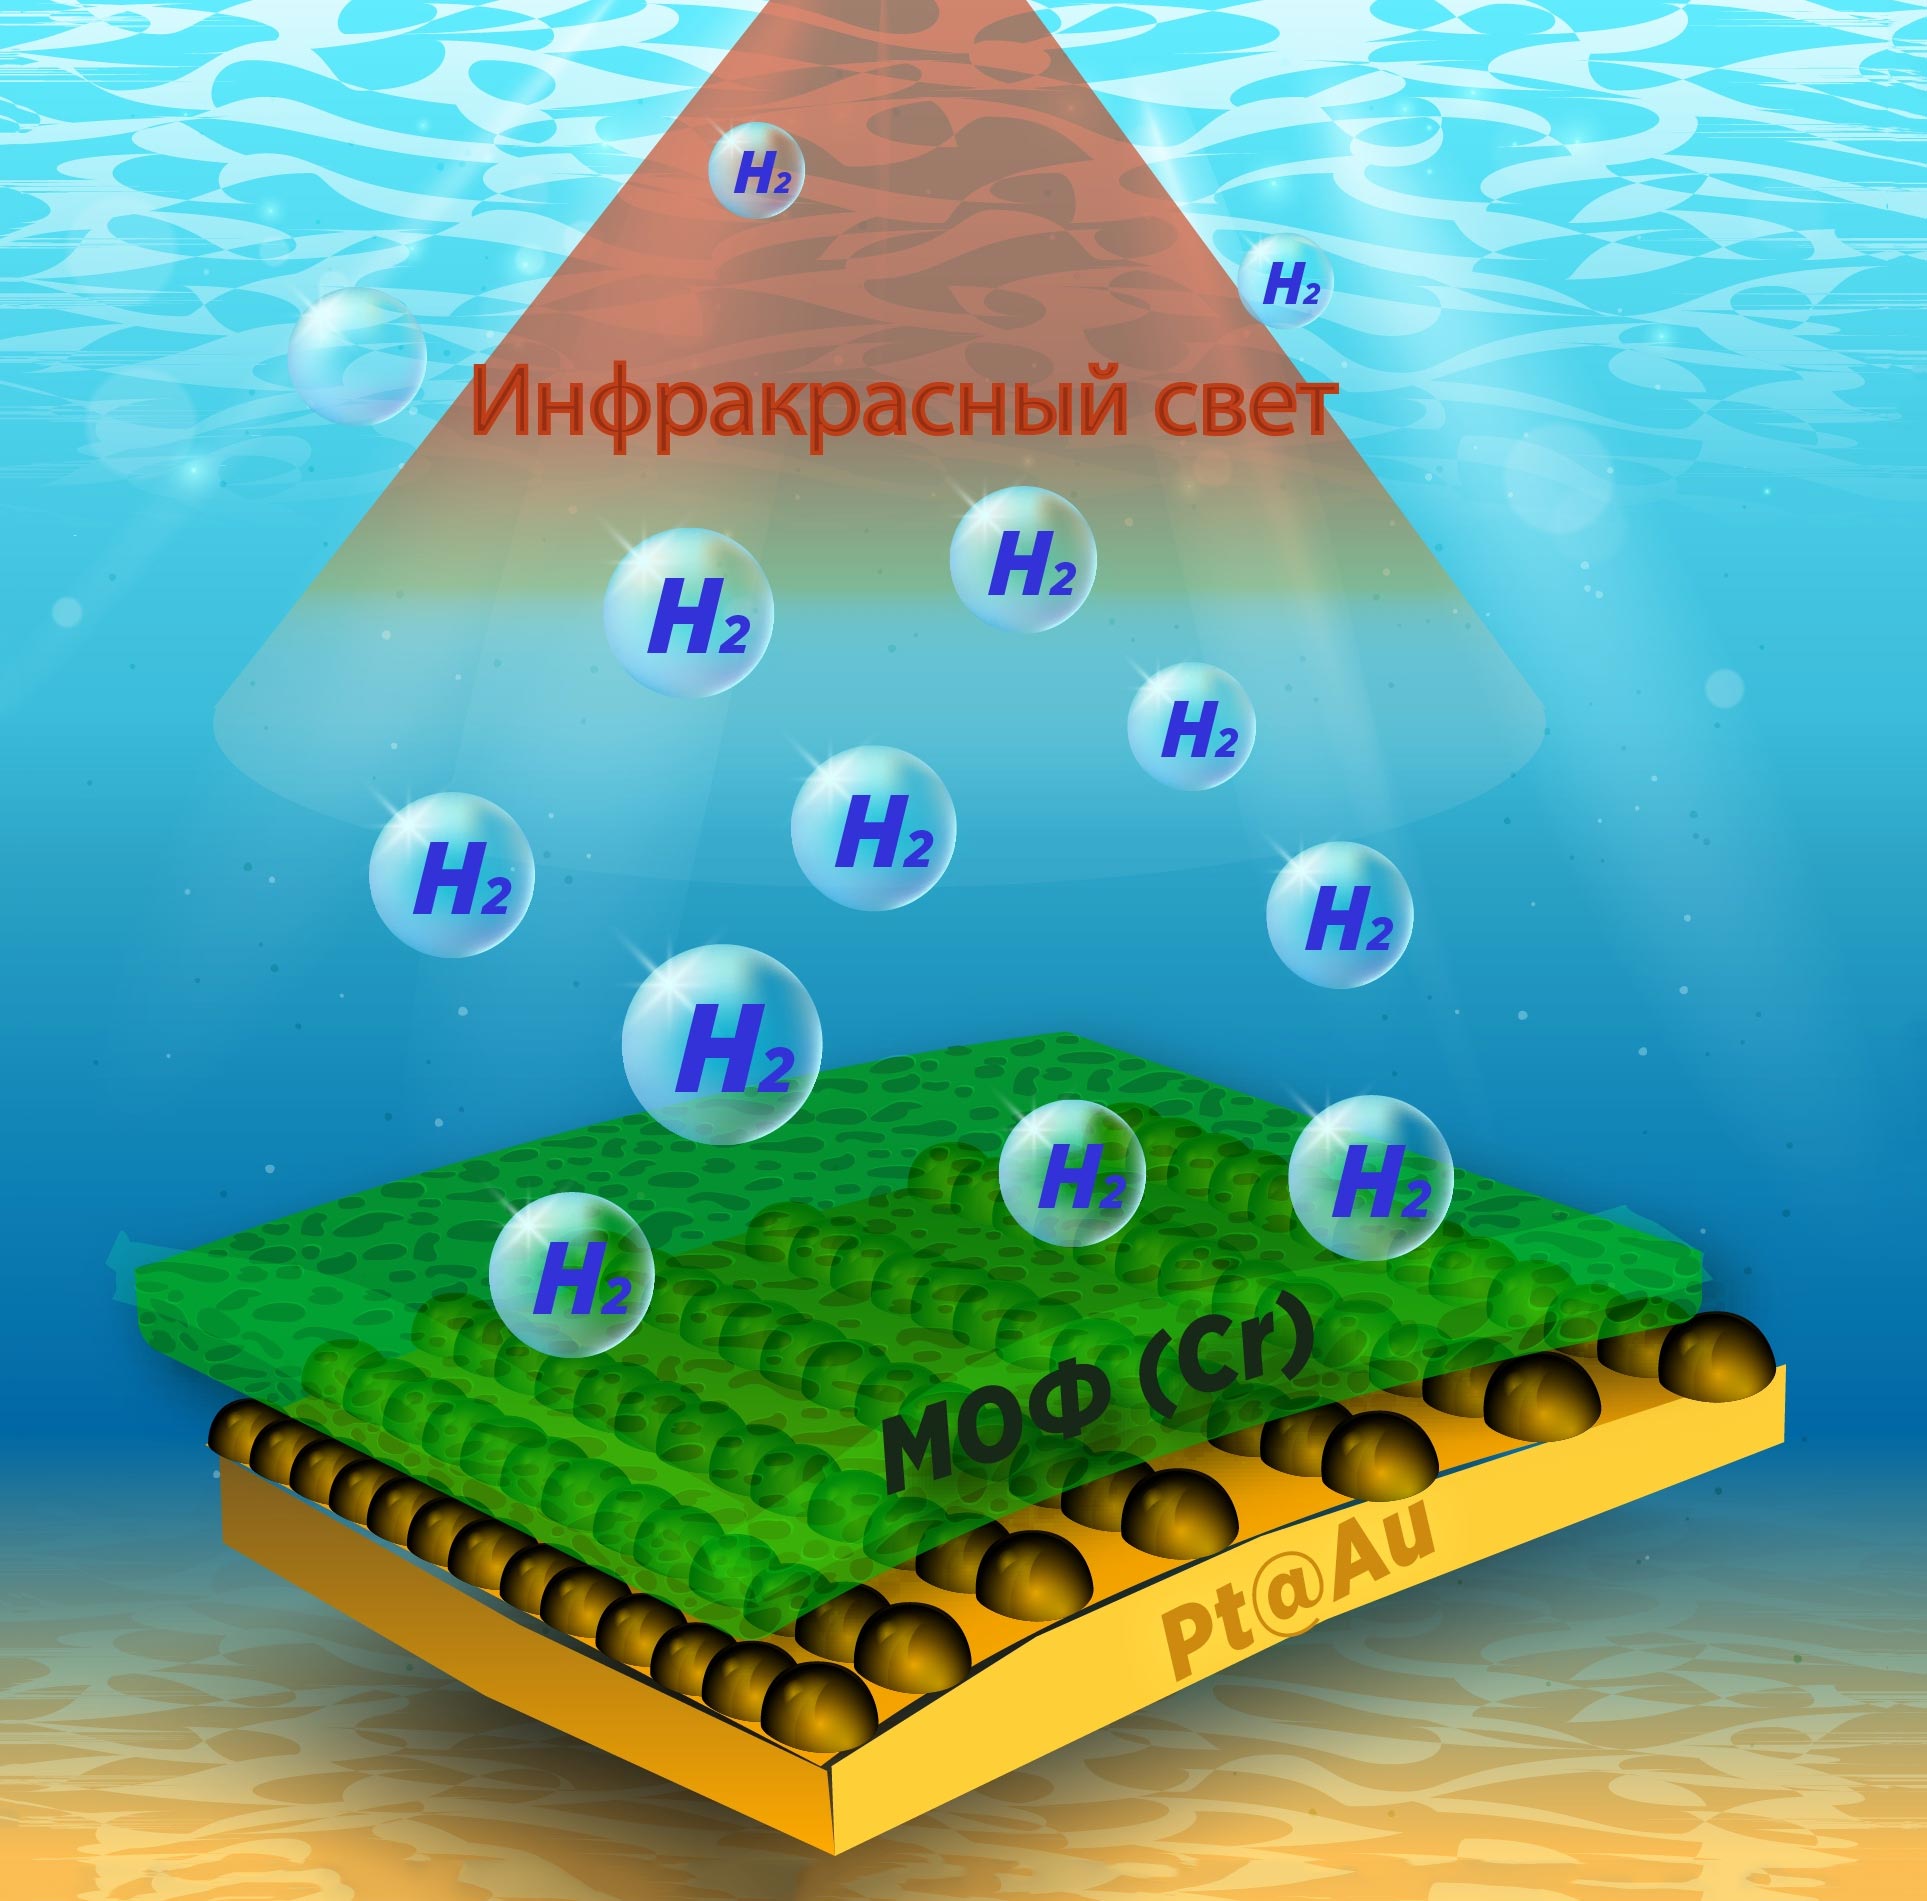 New Material Can Generate Hydrogen From Fresh, Salt, or Polluted Water by Exposure to Sunlight - SciTechDaily